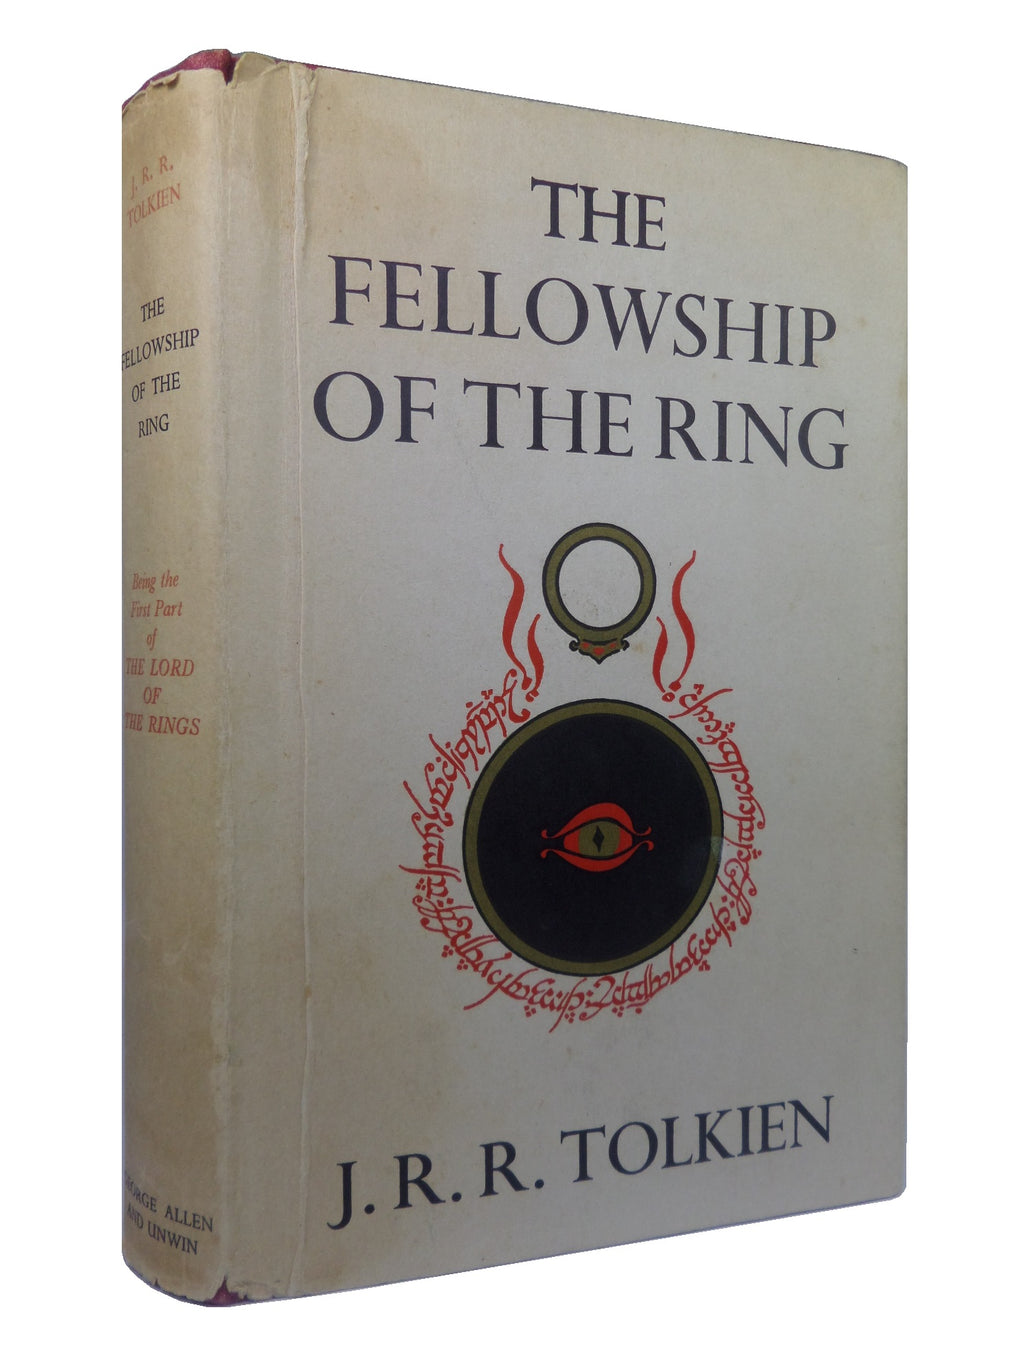 Fellowship of the Ring Vocabulary